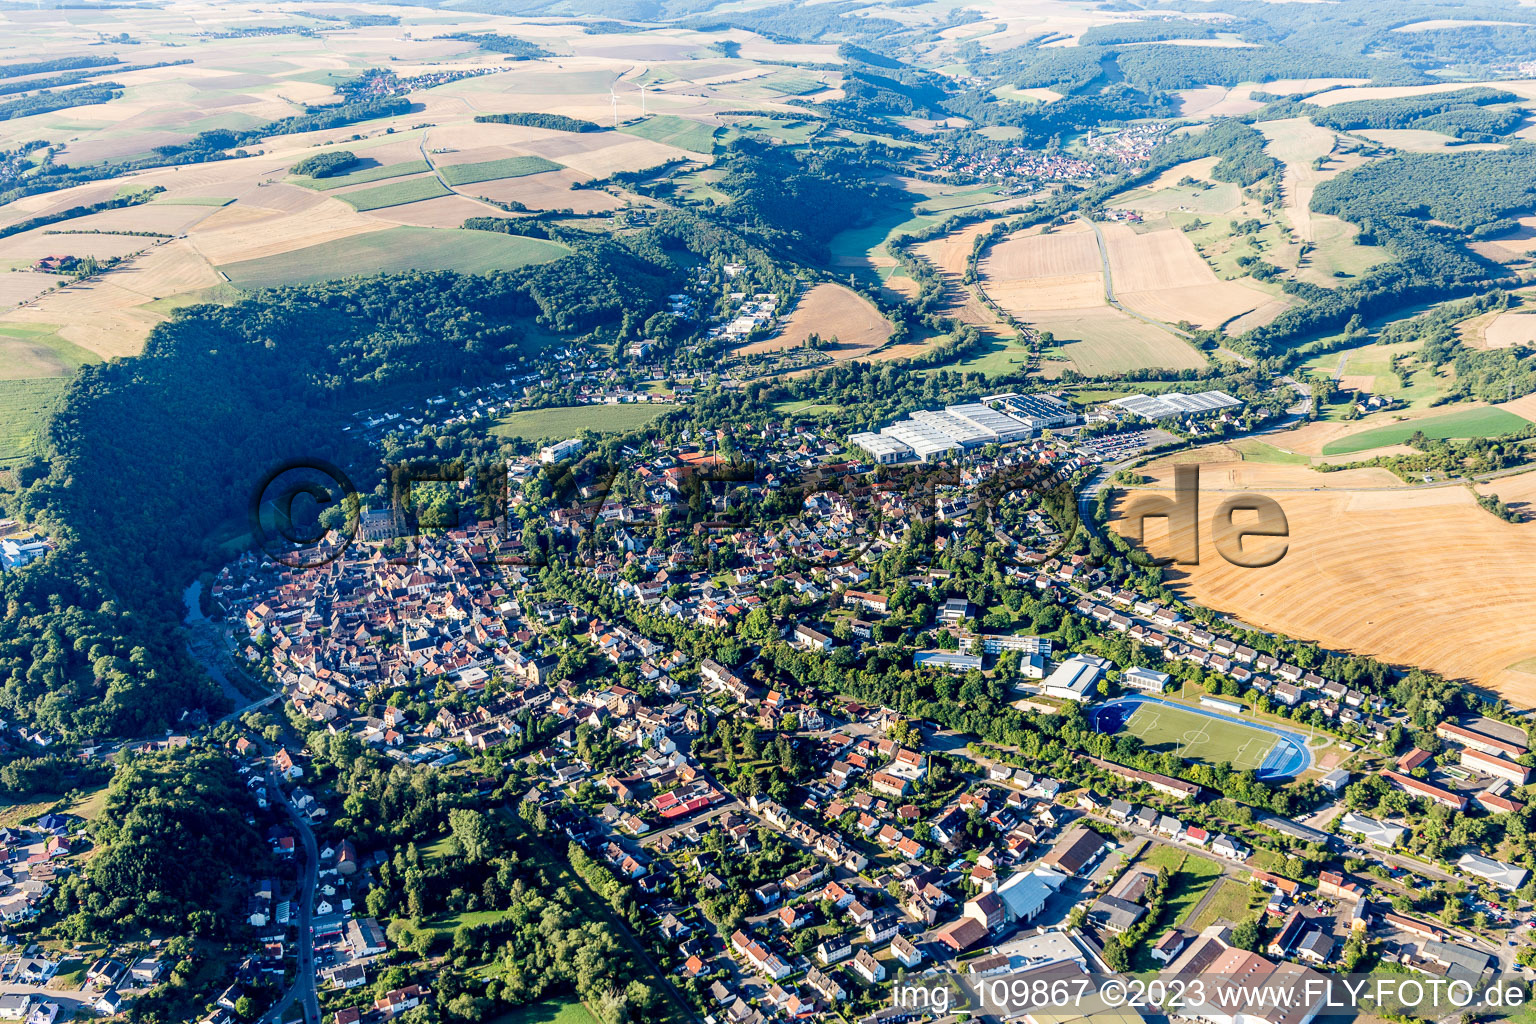 Meisenheim in the state Rhineland-Palatinate, Germany viewn from the air